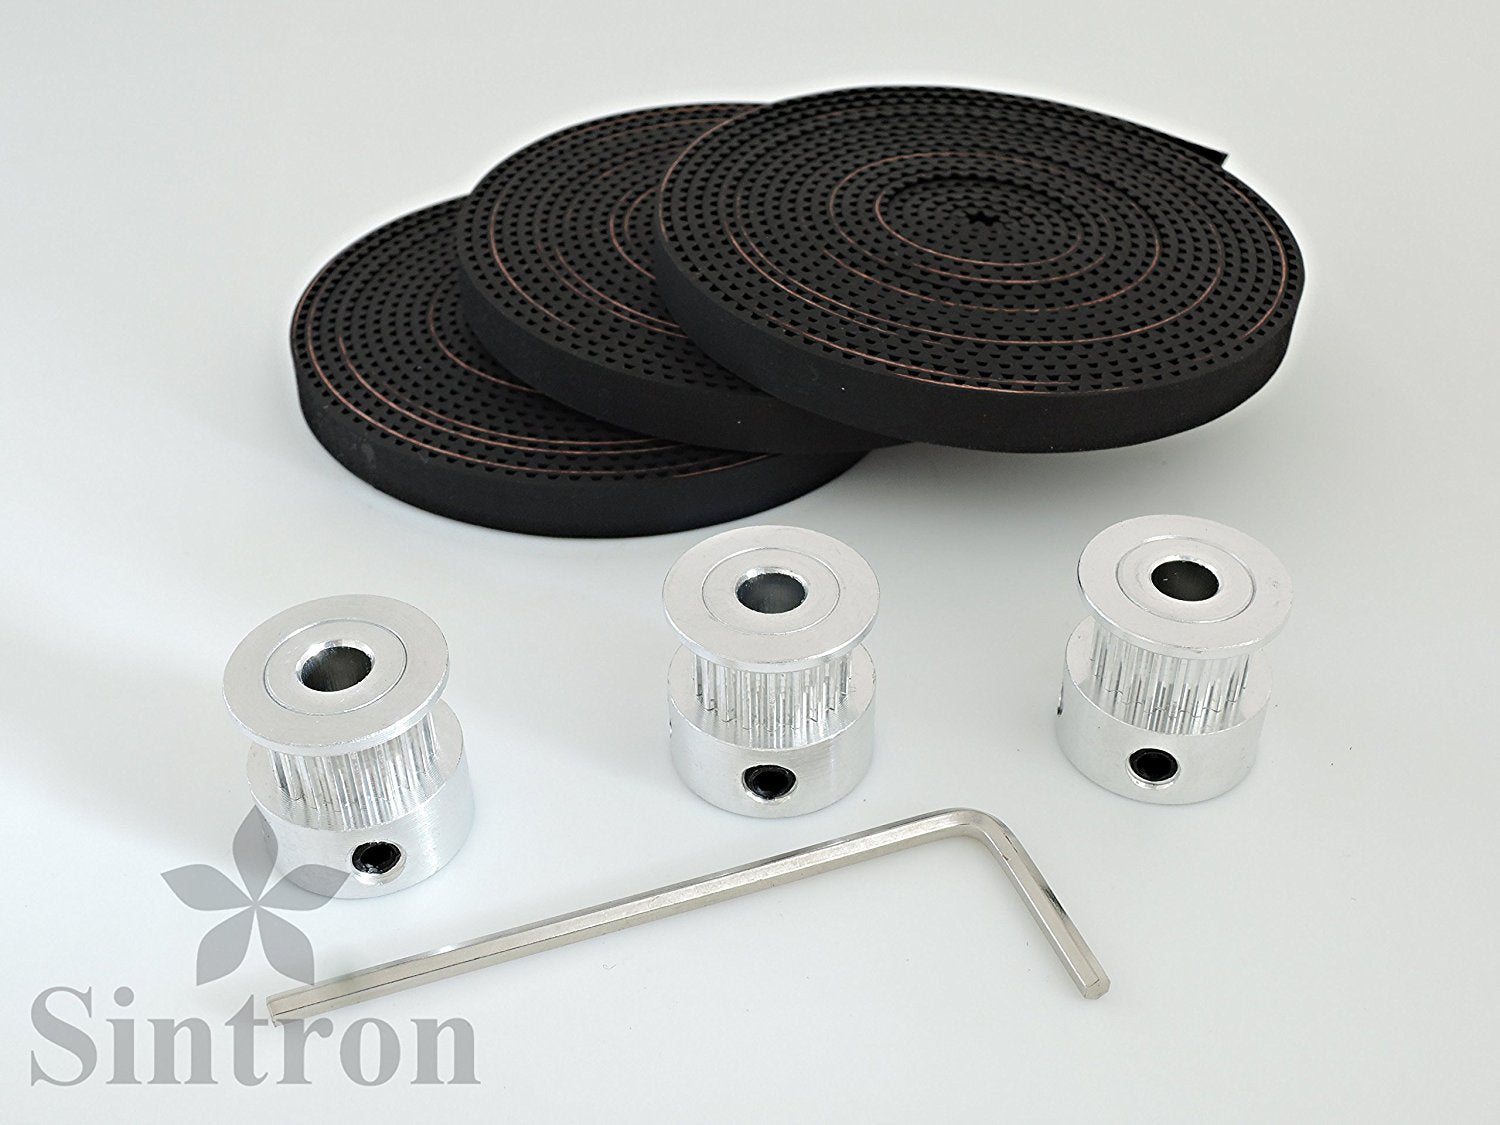 [Sintron] 6X F623zz Flange Metal Double Shielded Ball Bearing + 3X 2m Timing Belt + 3X GT2 20 Tooth Pulleys for RepRap Delta Rostock Kossel Mini 3D